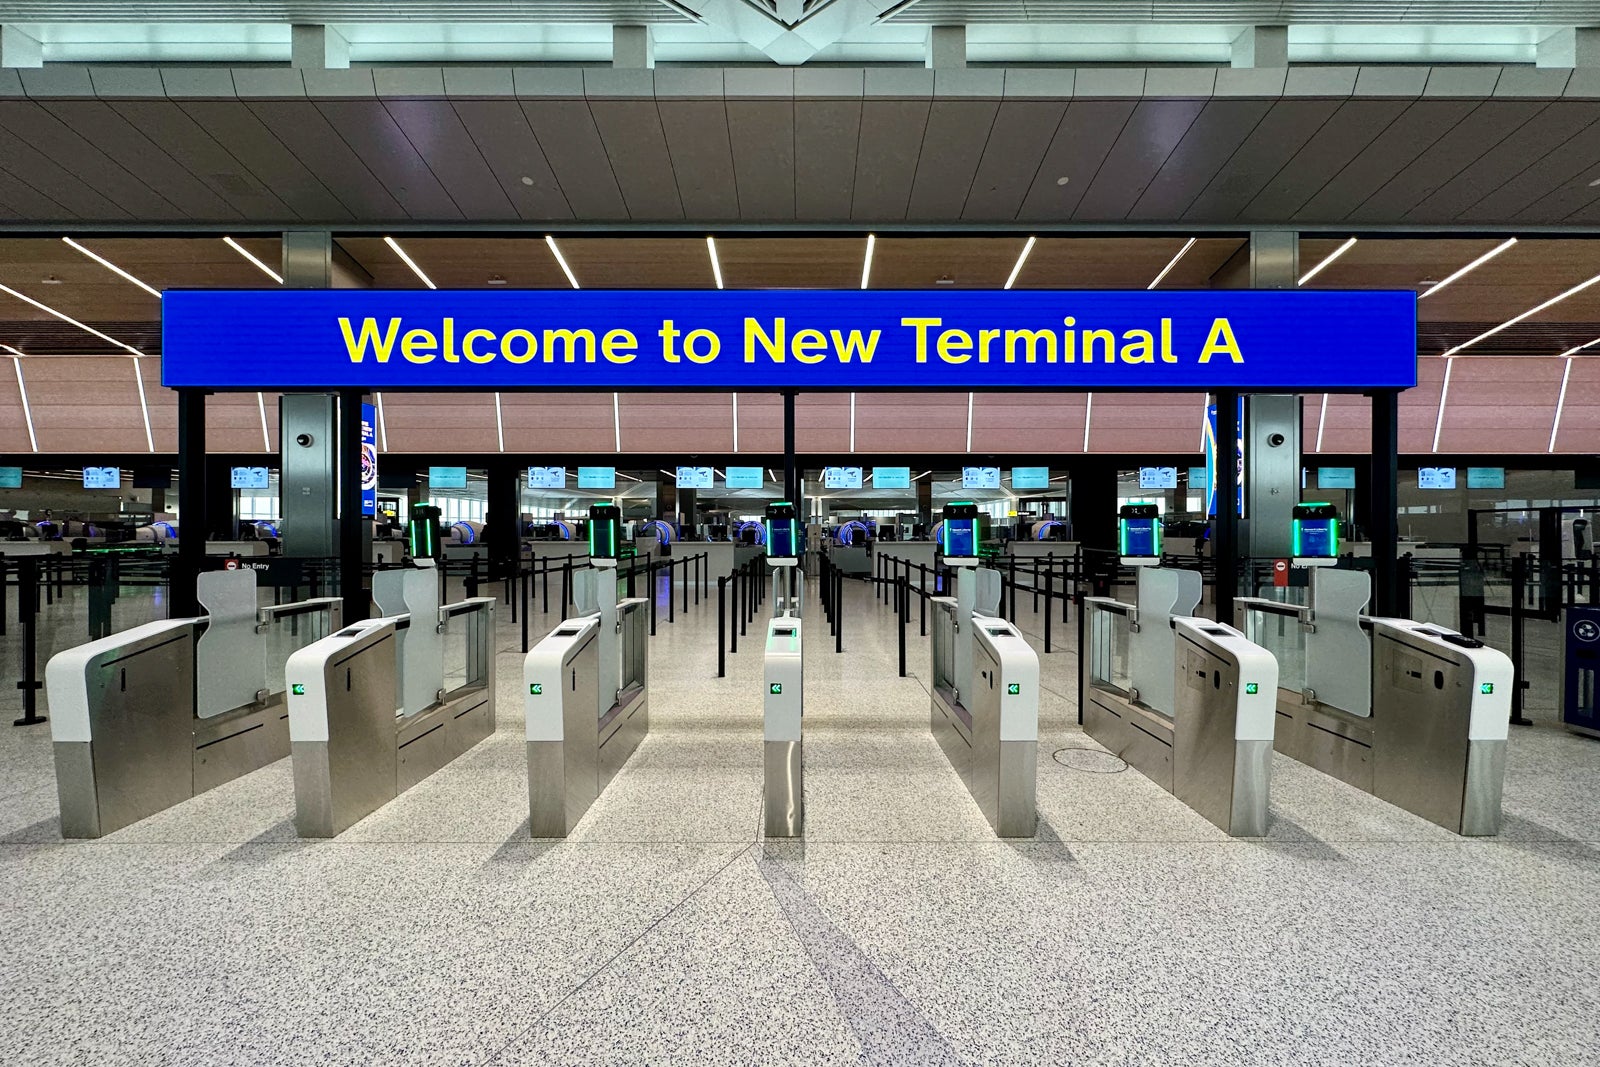 Newark’s stunning new Terminal A opens in just 1 week